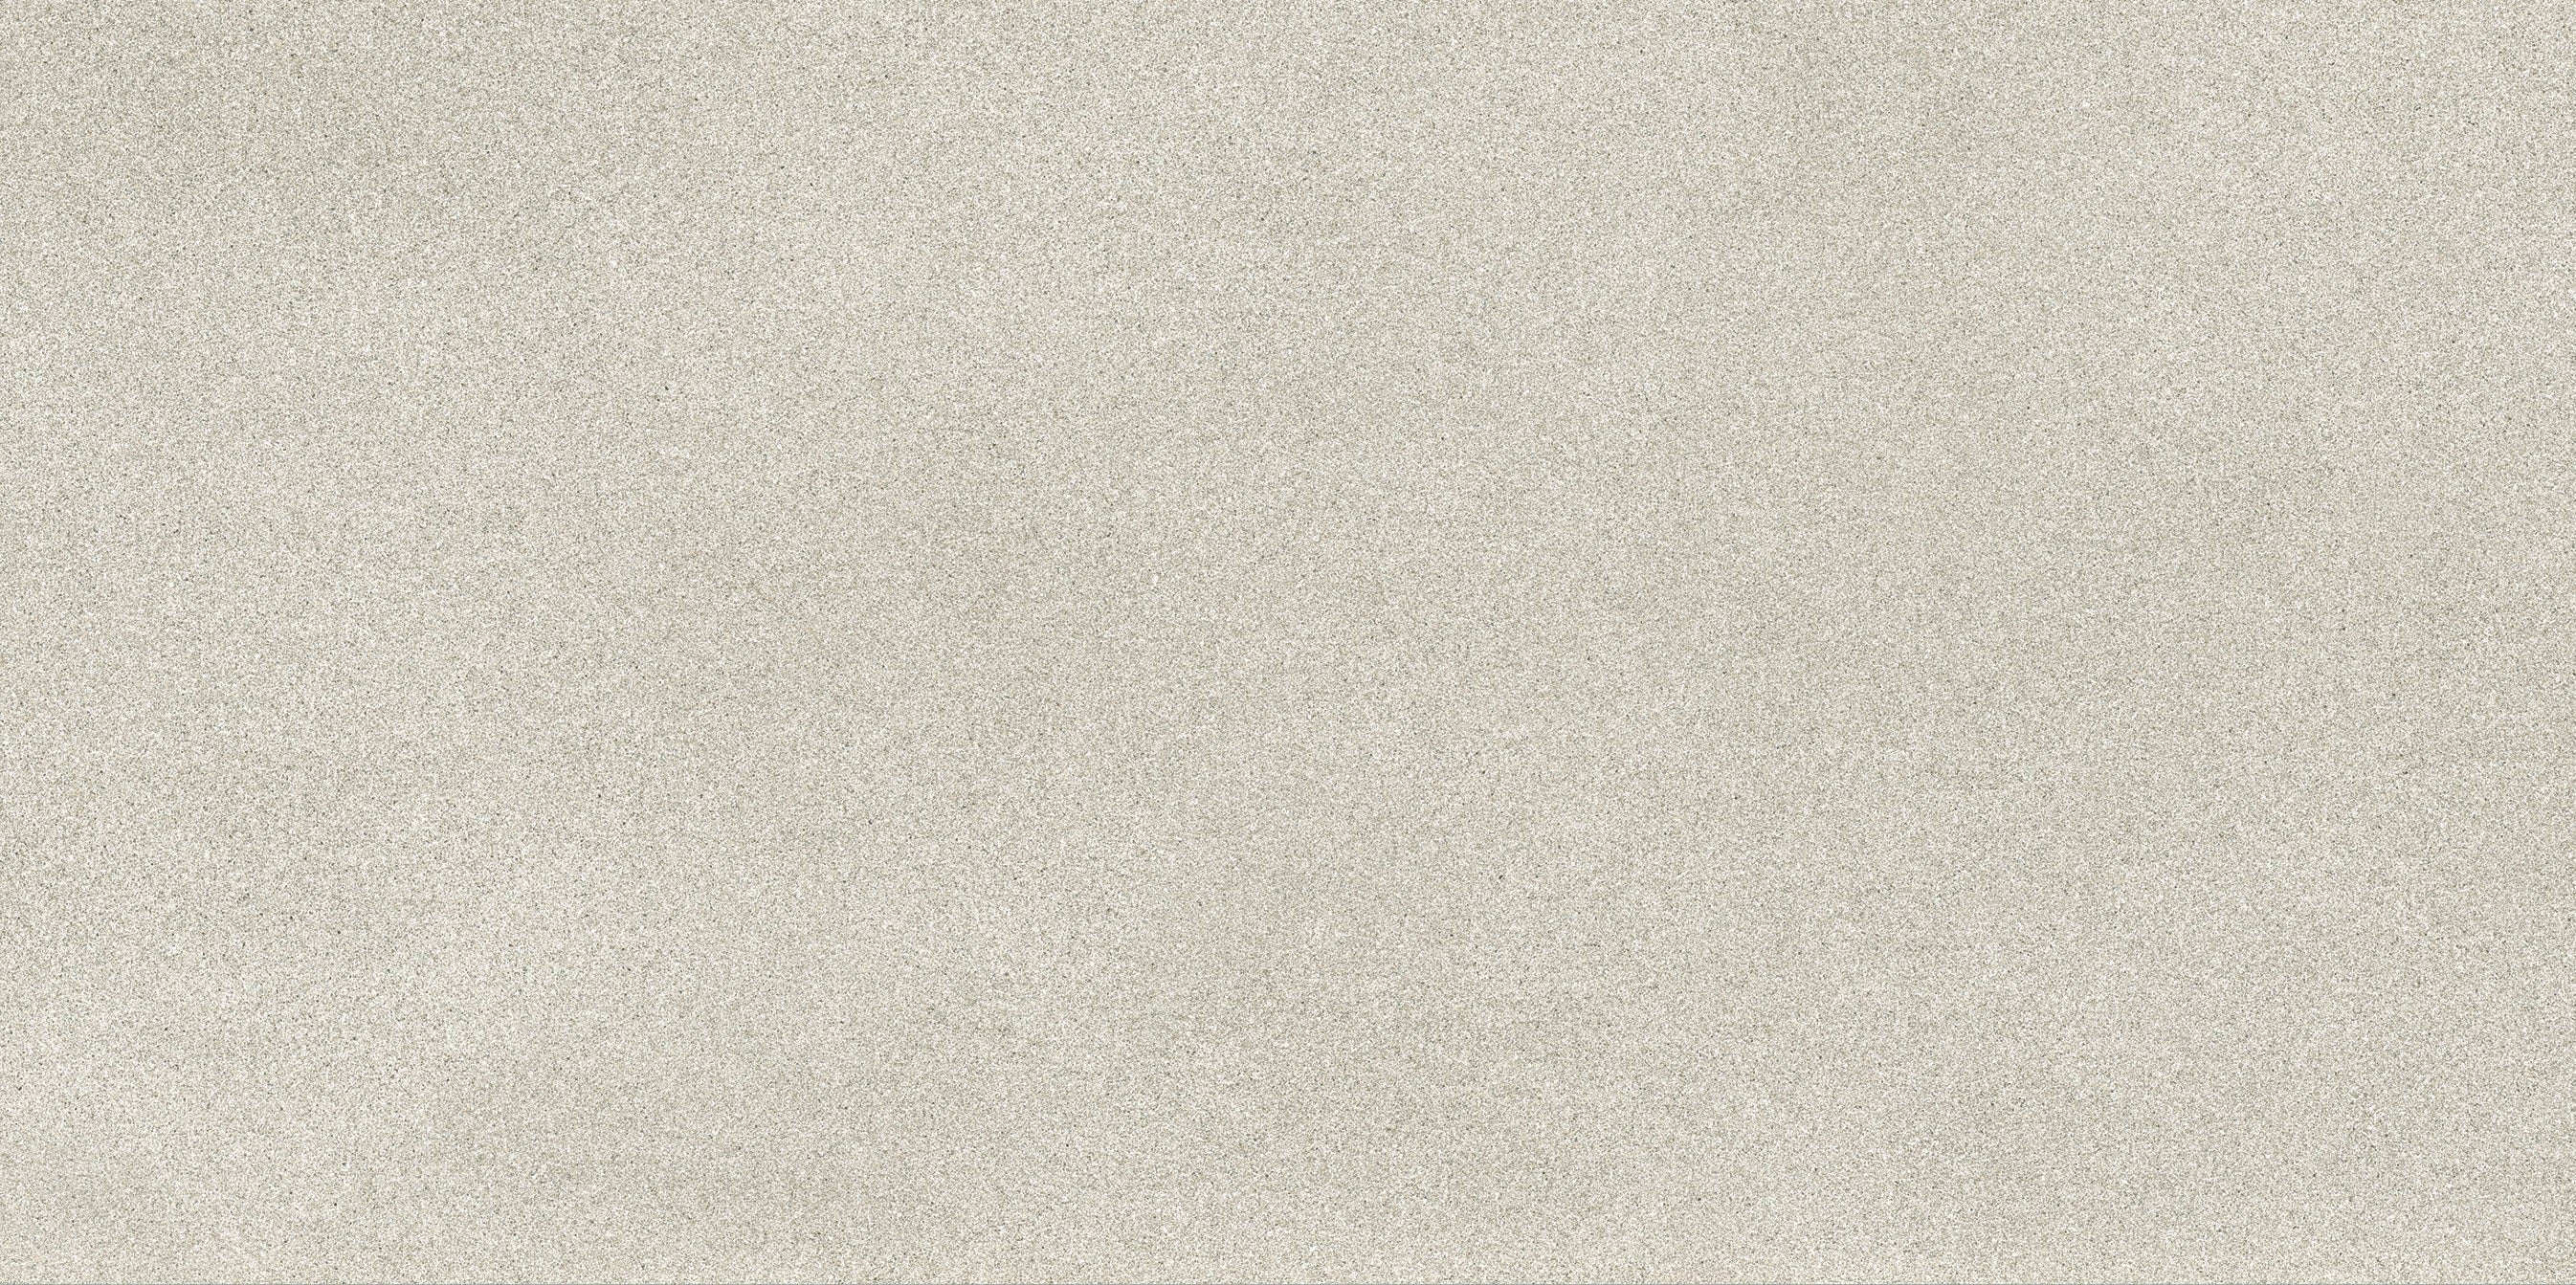 landmark 9mm masterplan precious ivory field tile 12x24x9mm matte rectified porcelain tile distributed by surface group international